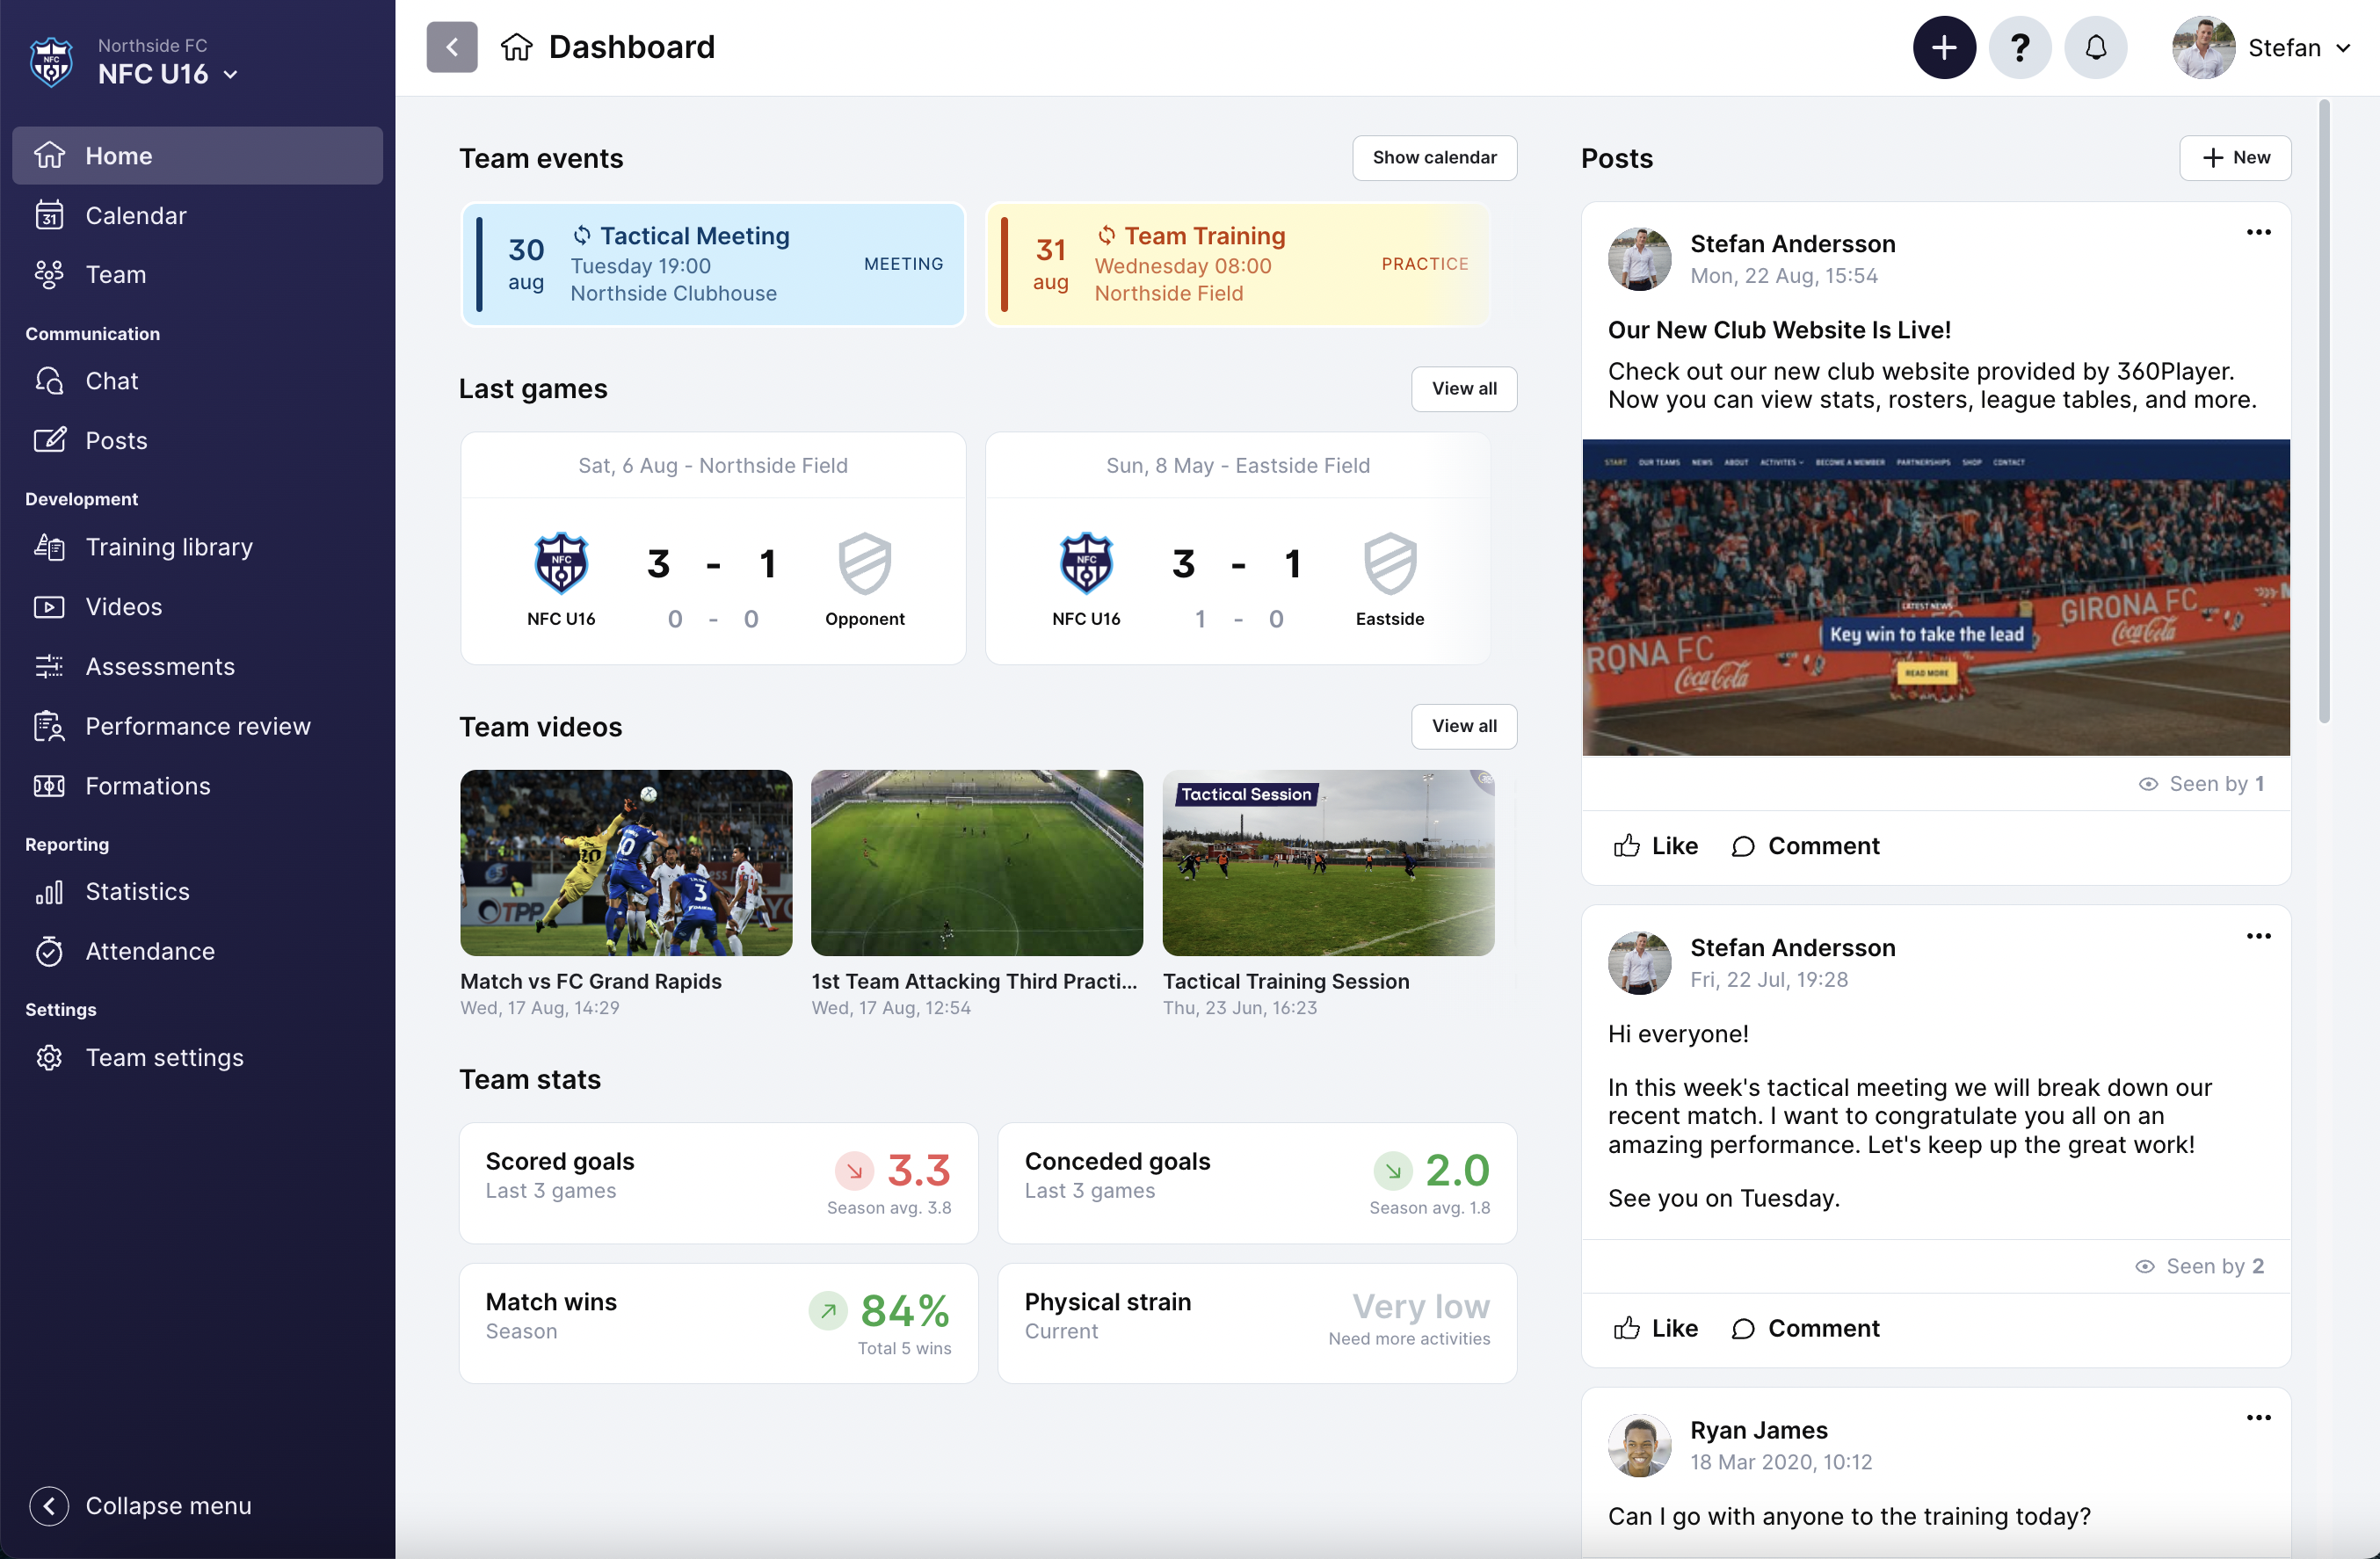 Dashboard view on desktop showing an overview of a team's calendar, wall, recent matches, videos, stats, and more.